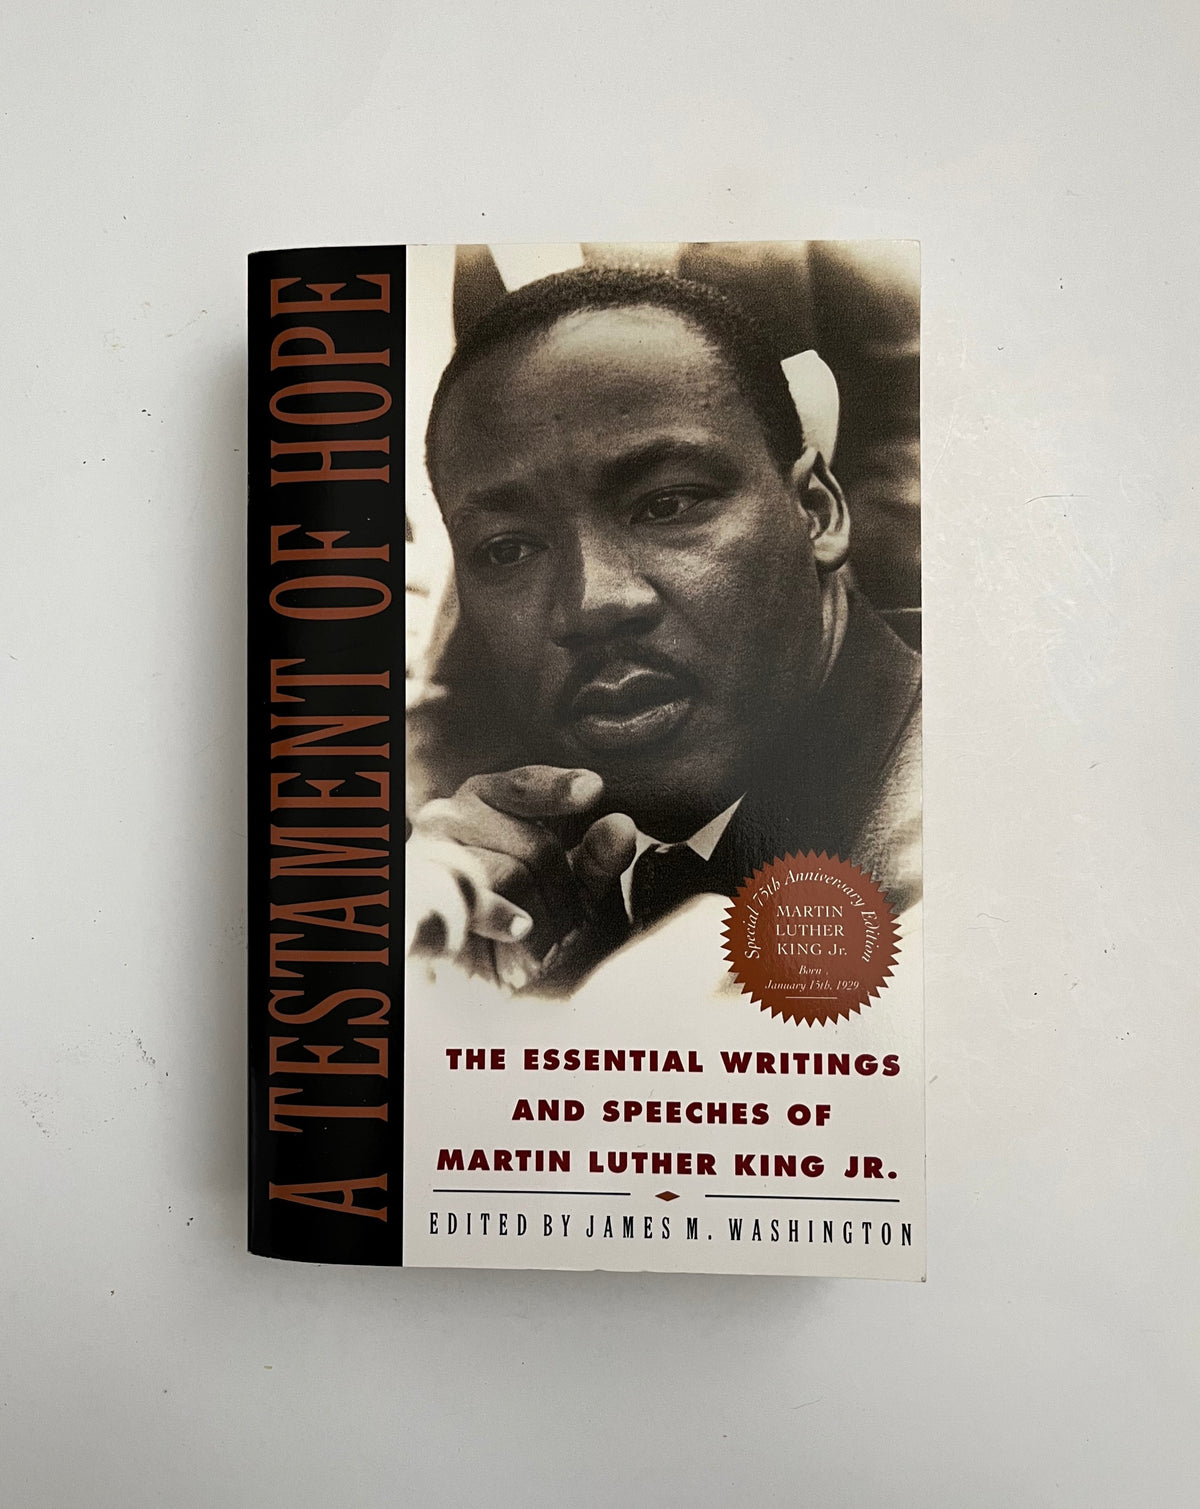 Donate: A Testament of Hope: The Essential Writings and Speeches of Martin Luther King Jr. edited by James M. Washington